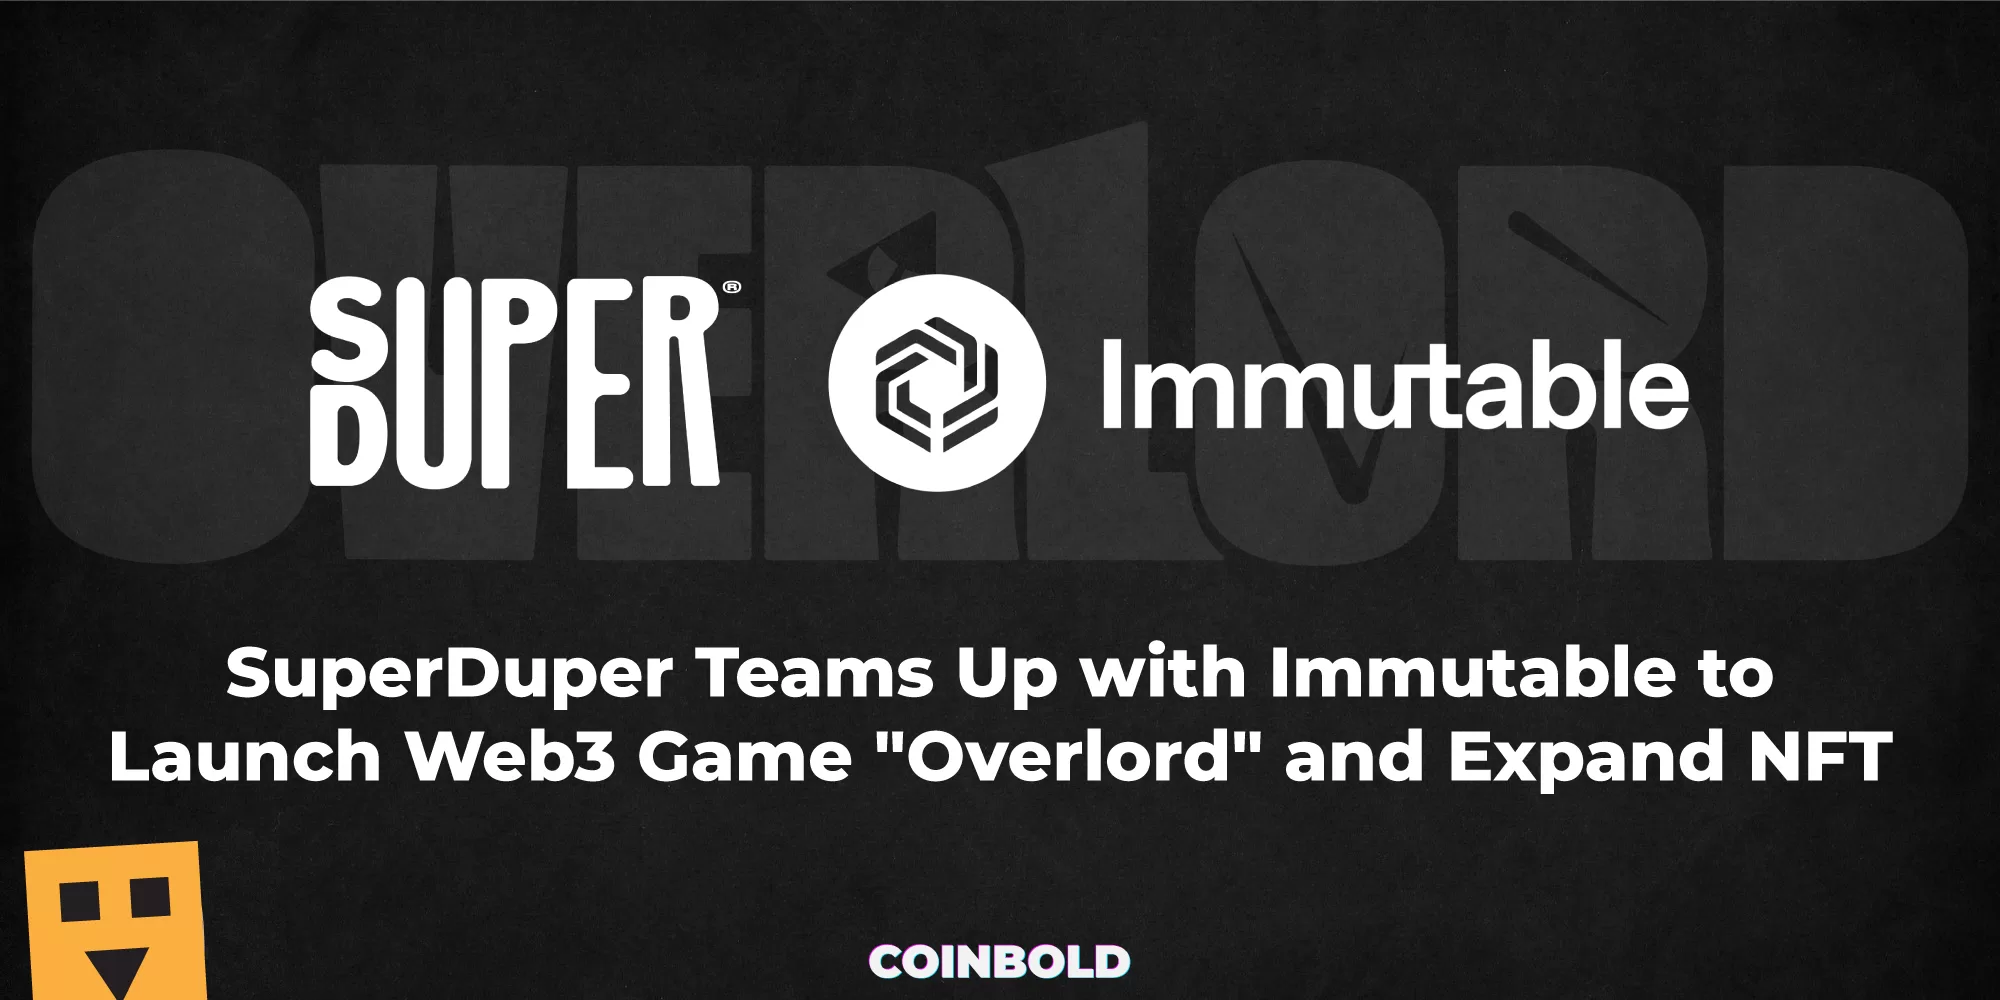 SuperDuper Teams Up with Immutable to Launch Web3 Game "Overlord" and Expand NFT Brand